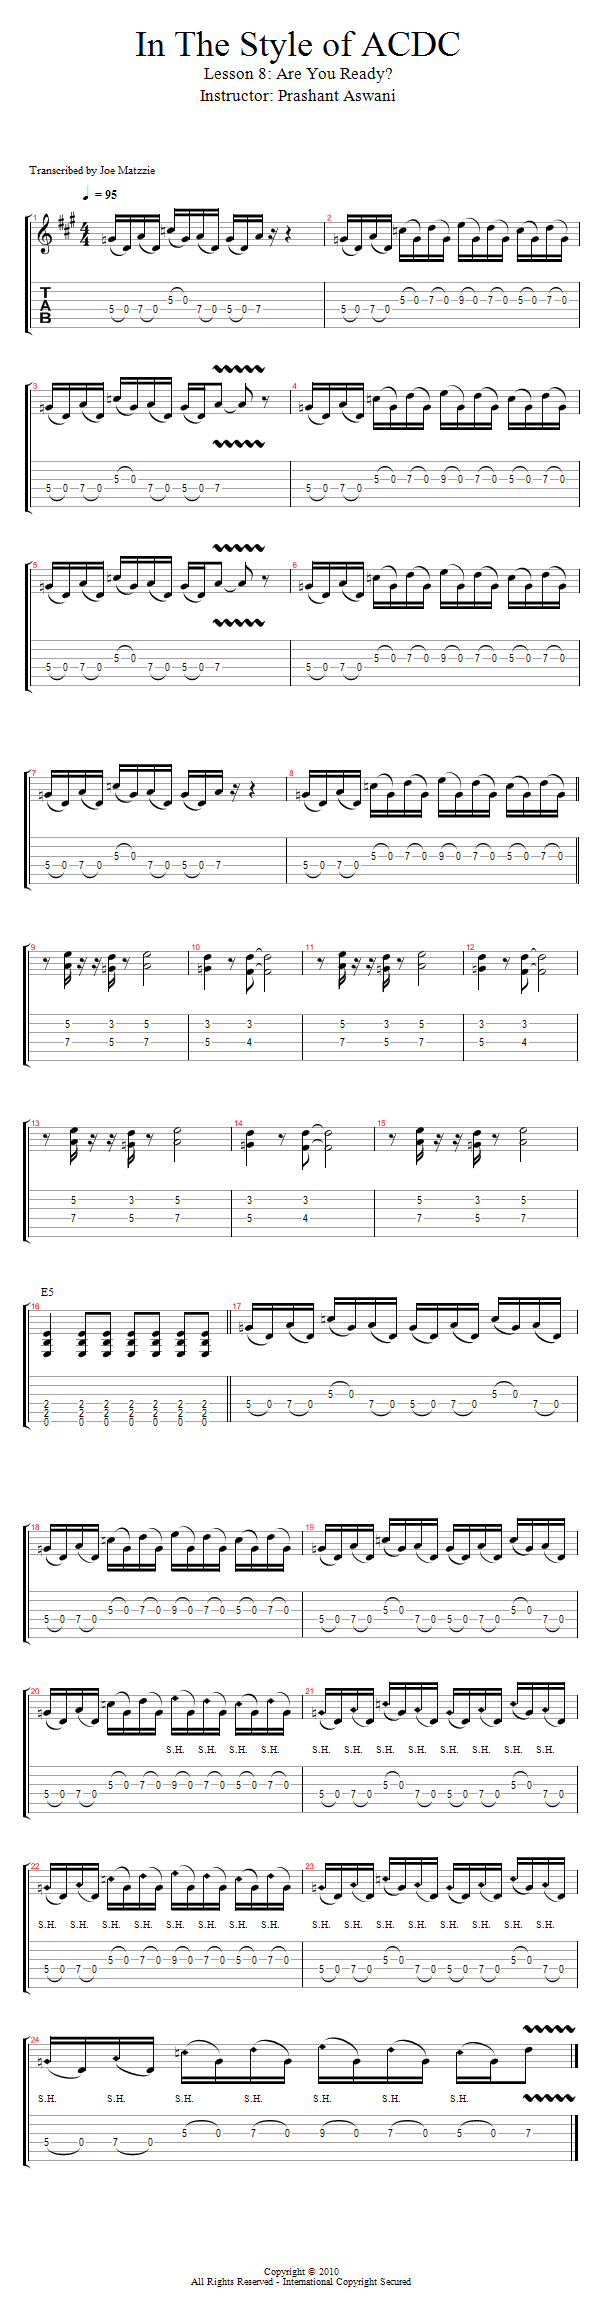 Are You Ready to Rawk? song notation